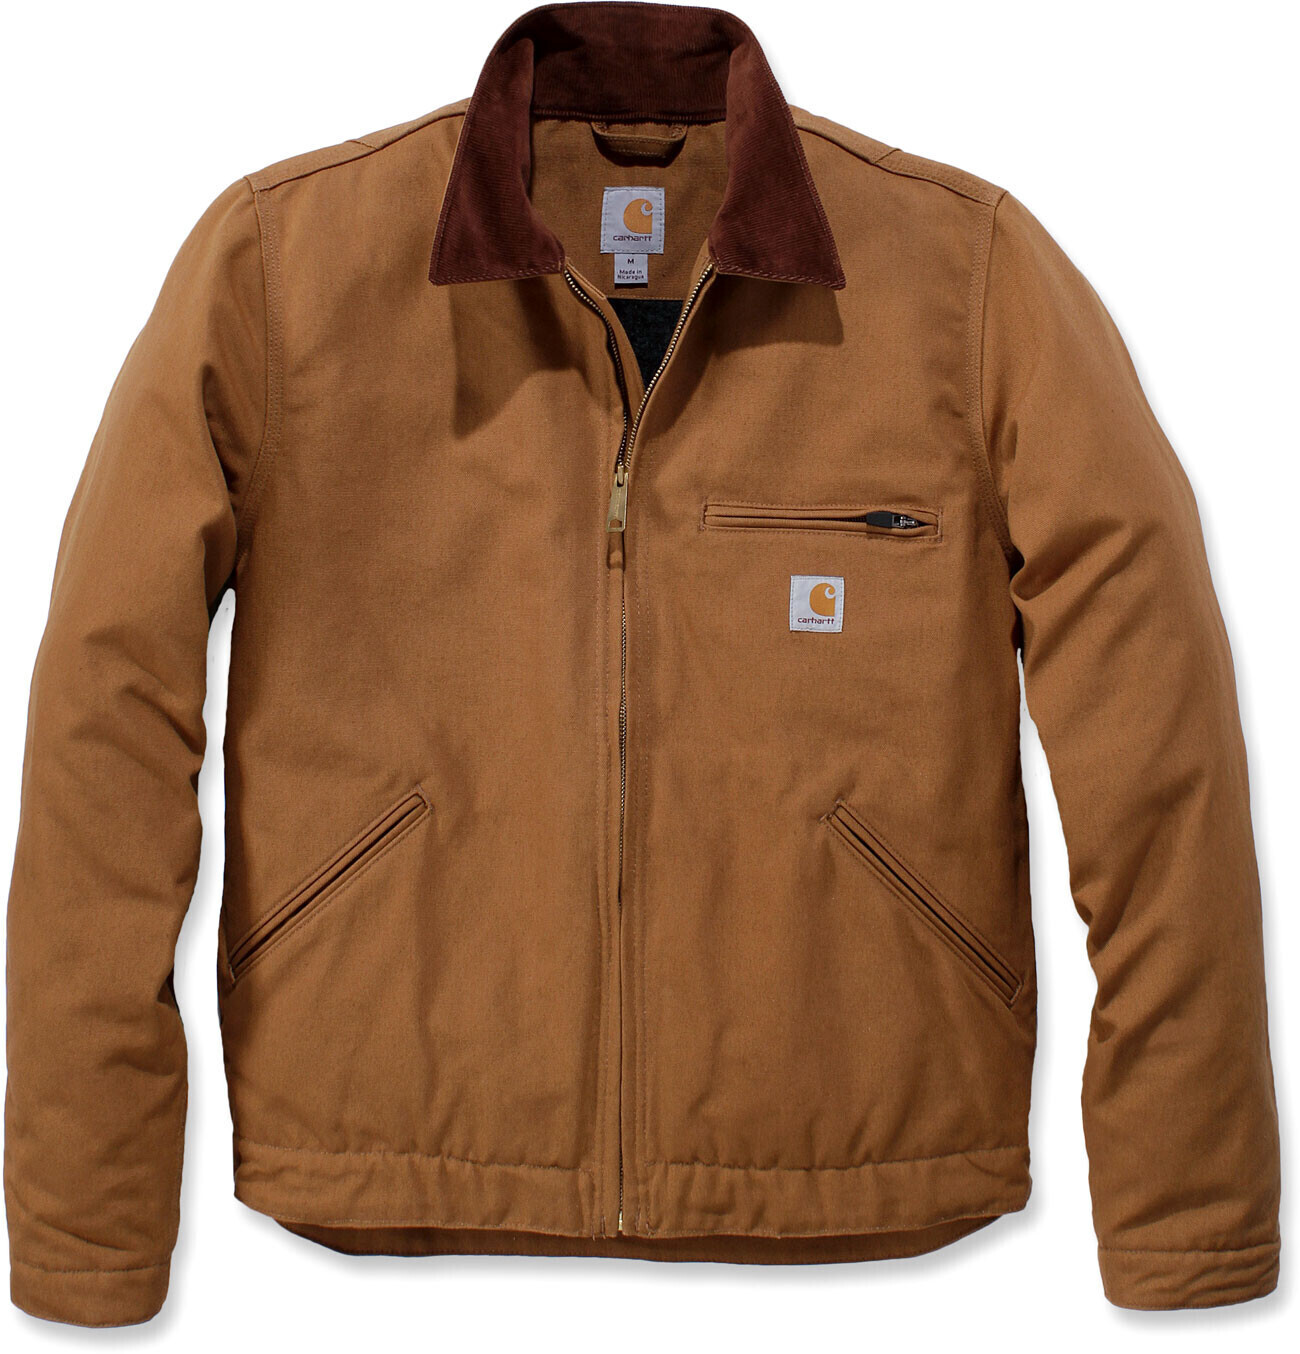 Buy Carhartt Duck Detroit Jacket brown (103828) from £180.24 (Today ...